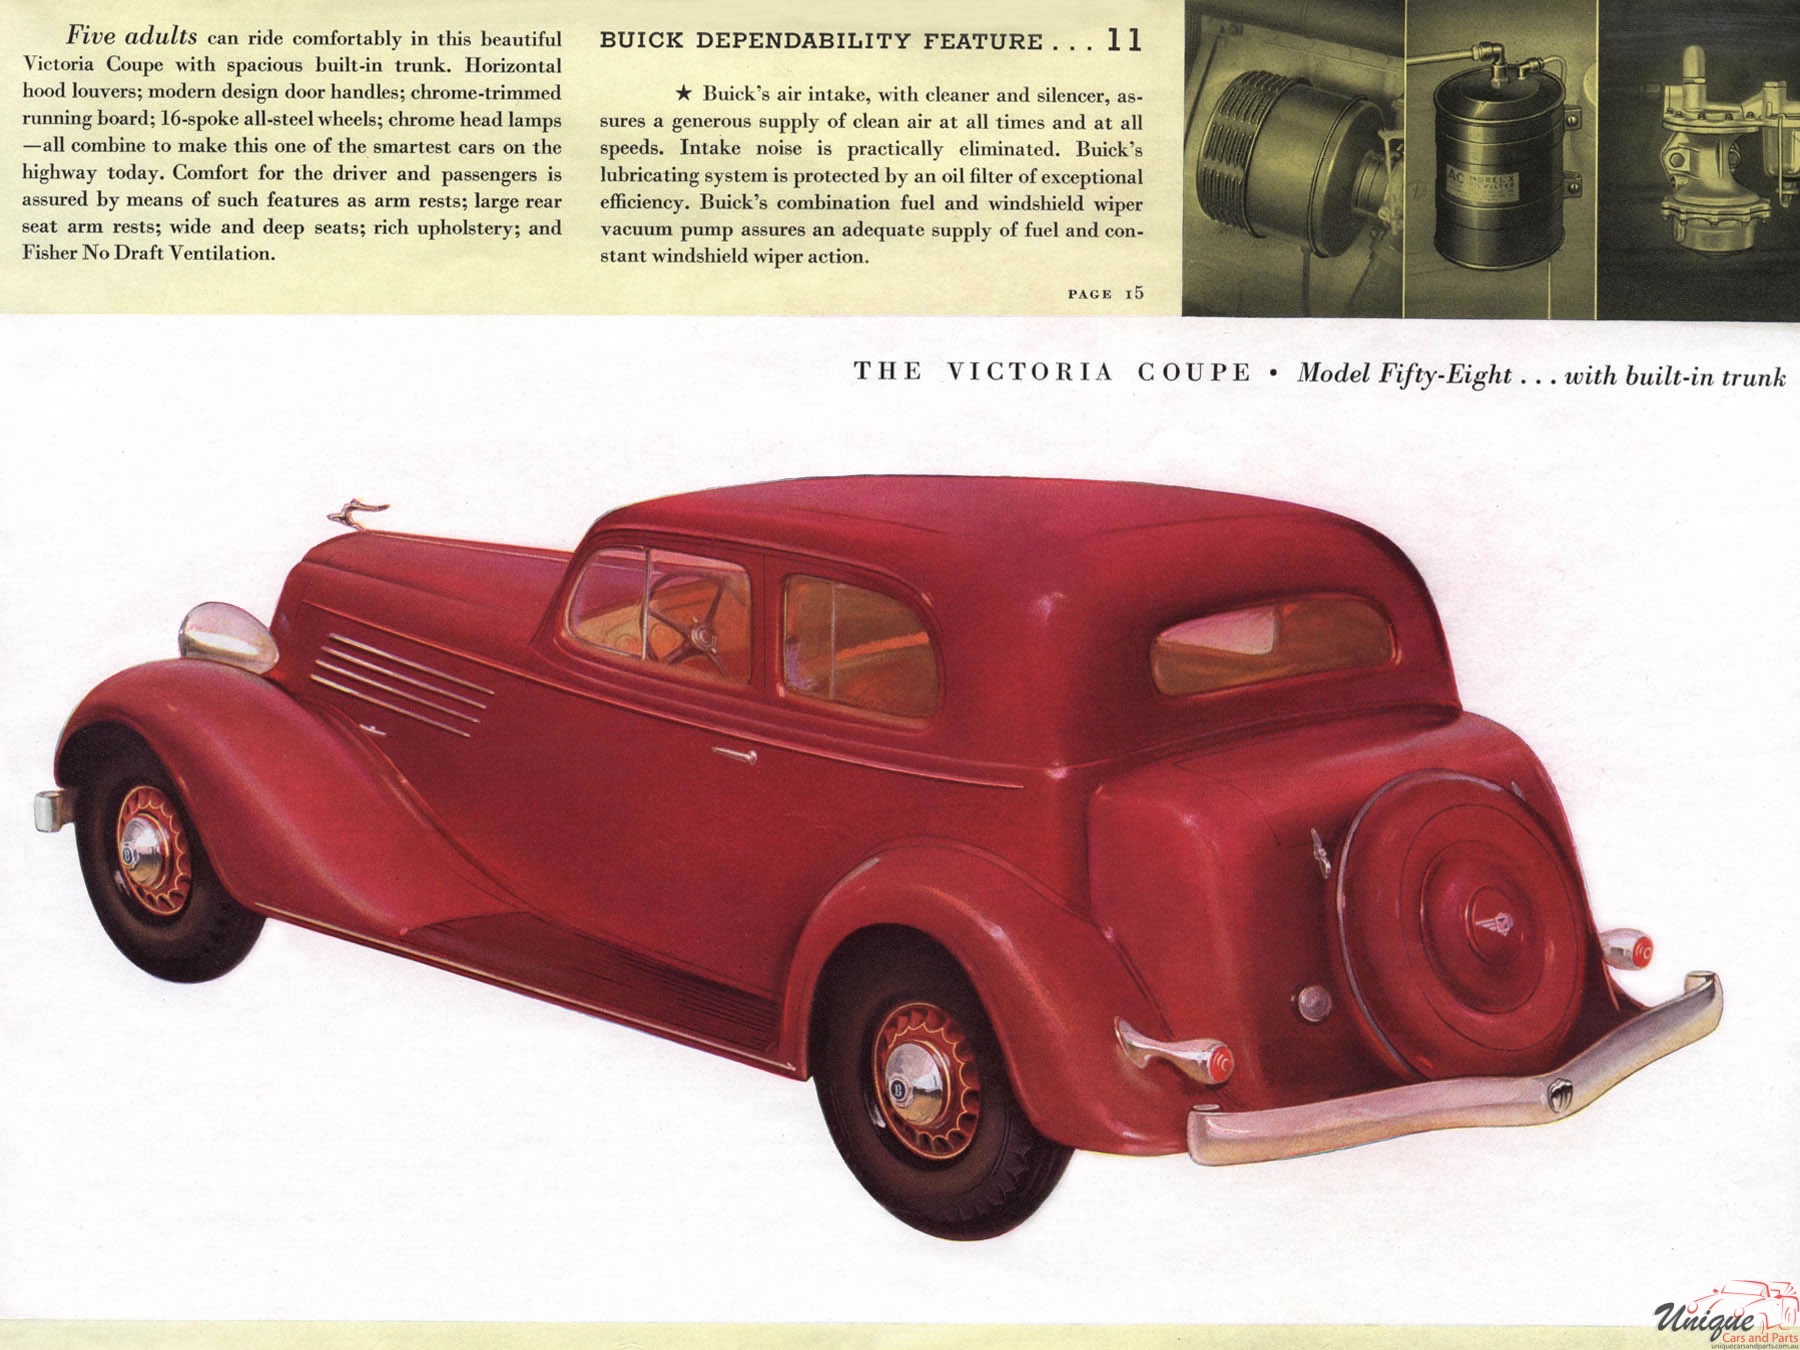 1935 Buick Brochure Page 28